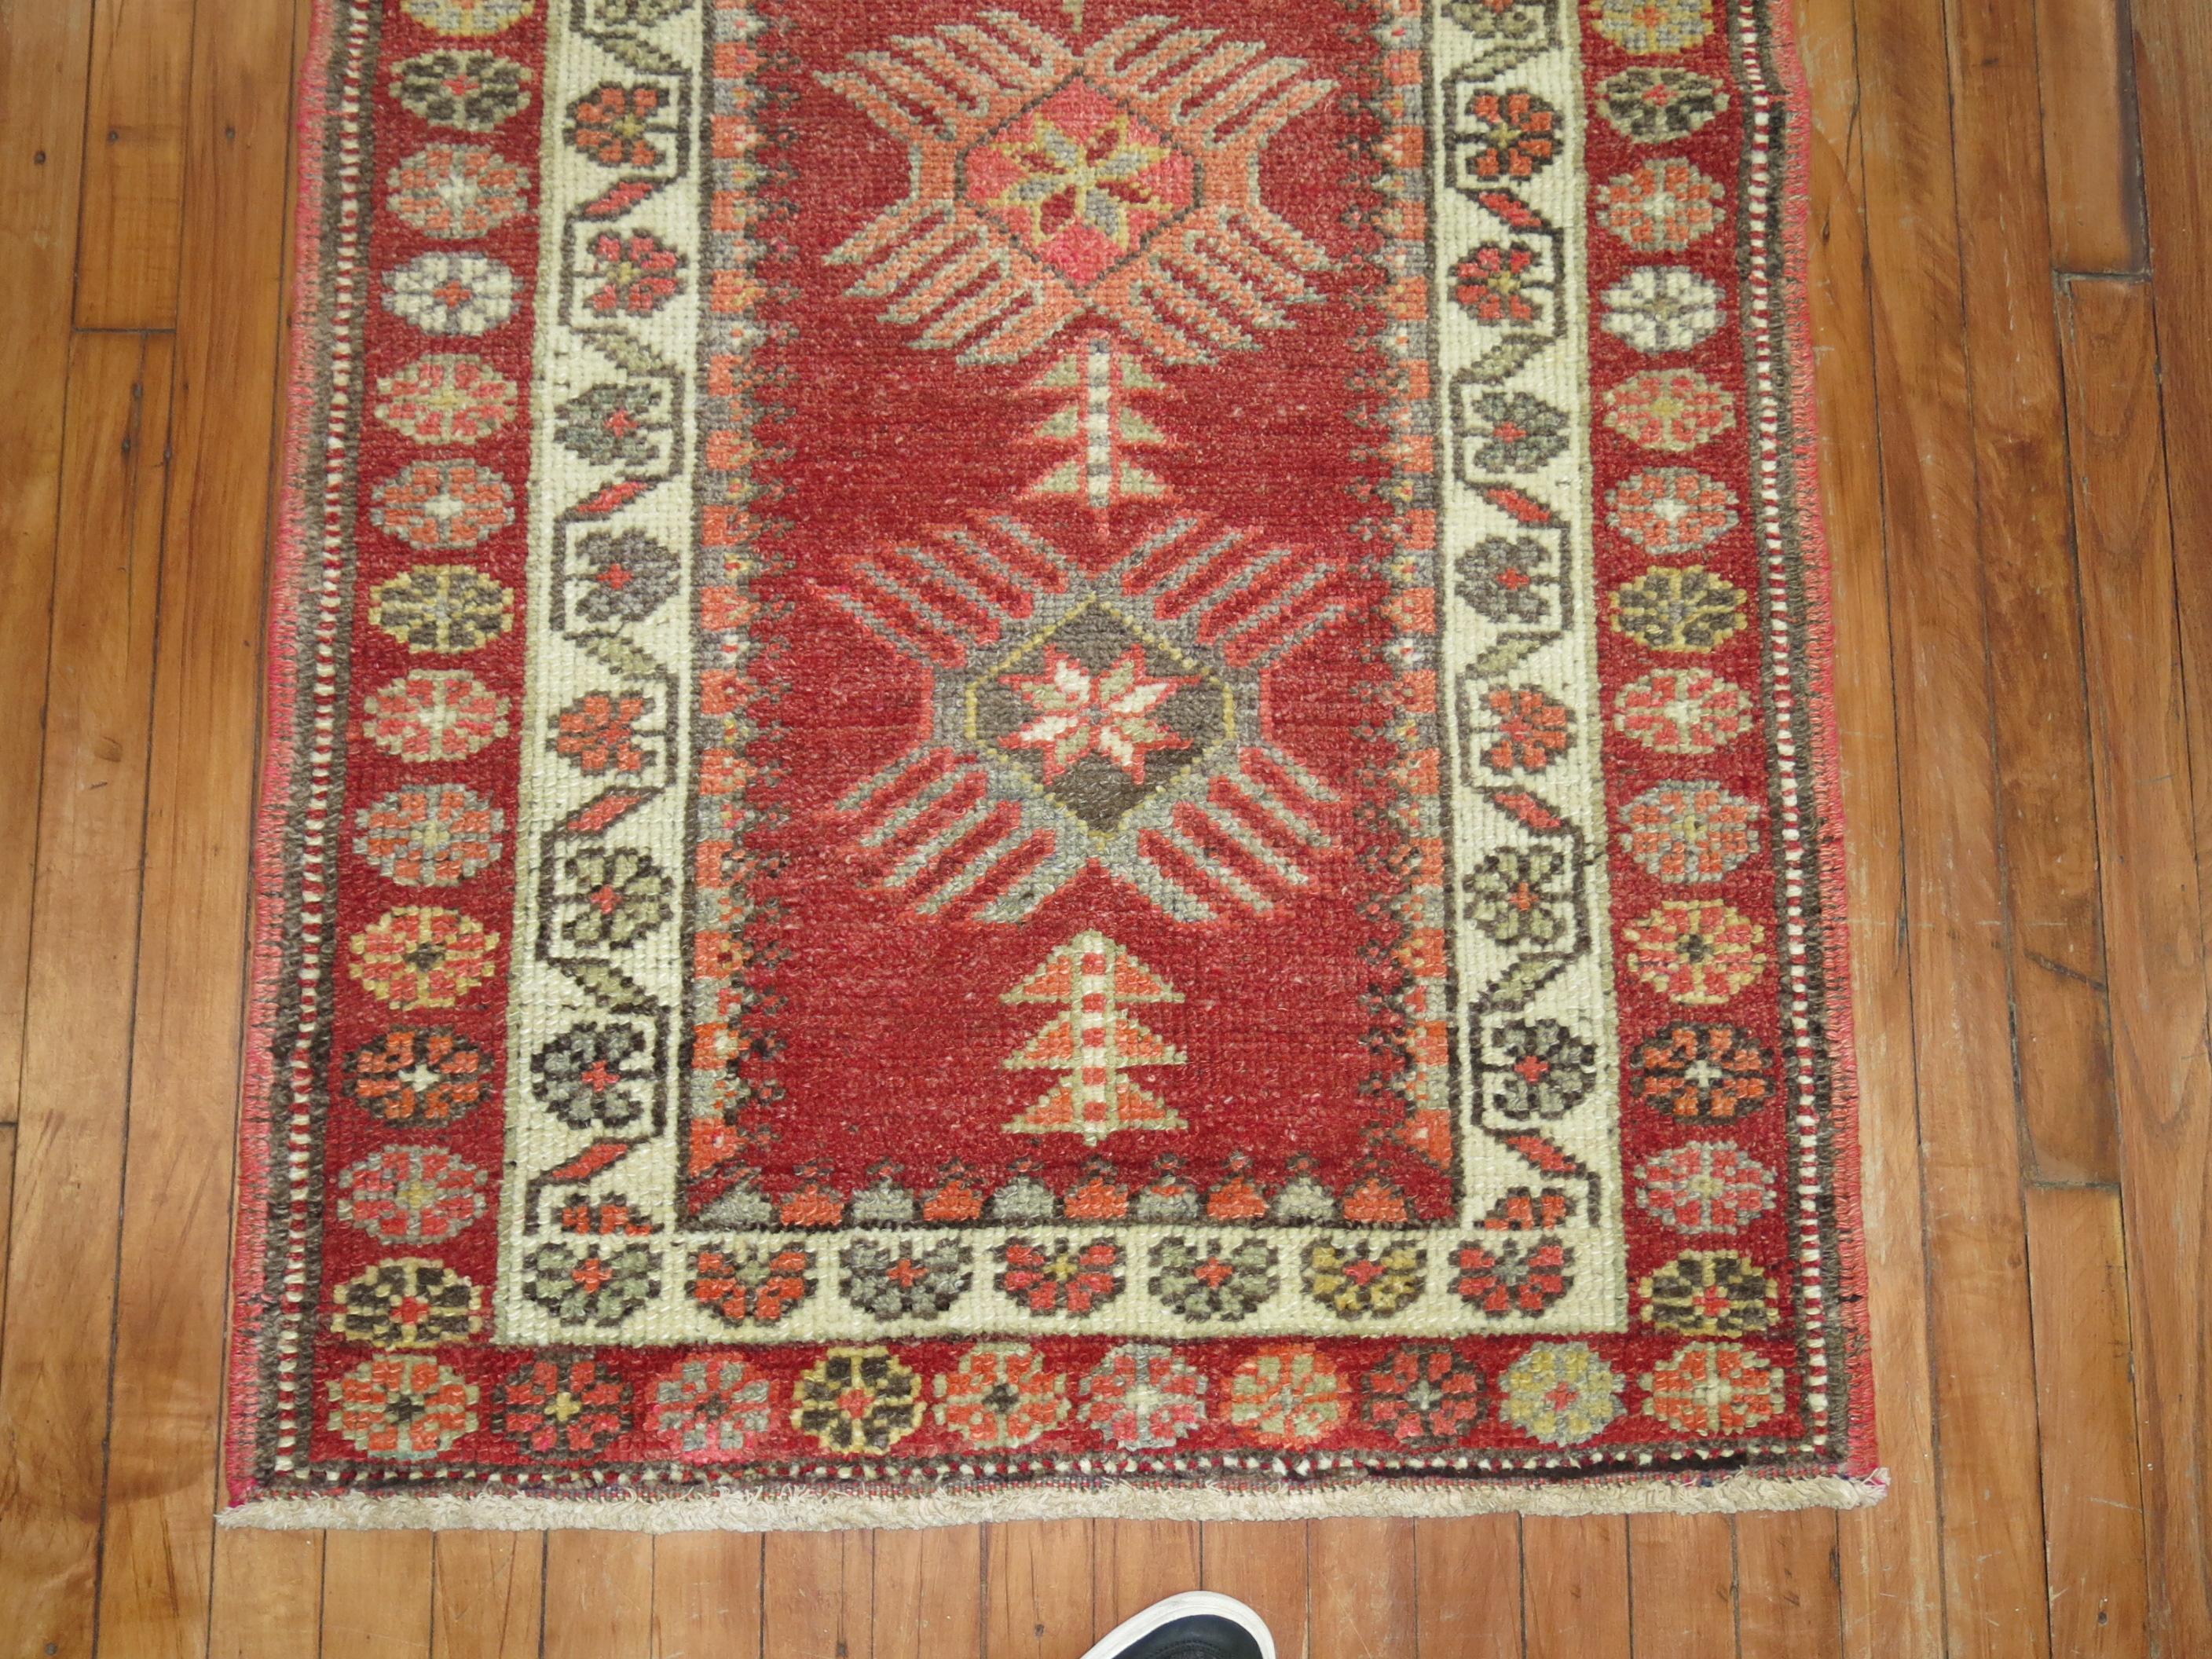 Narrow and long vintage Turkish Anatolian runner in a deep red tone.

Measures: 2'11